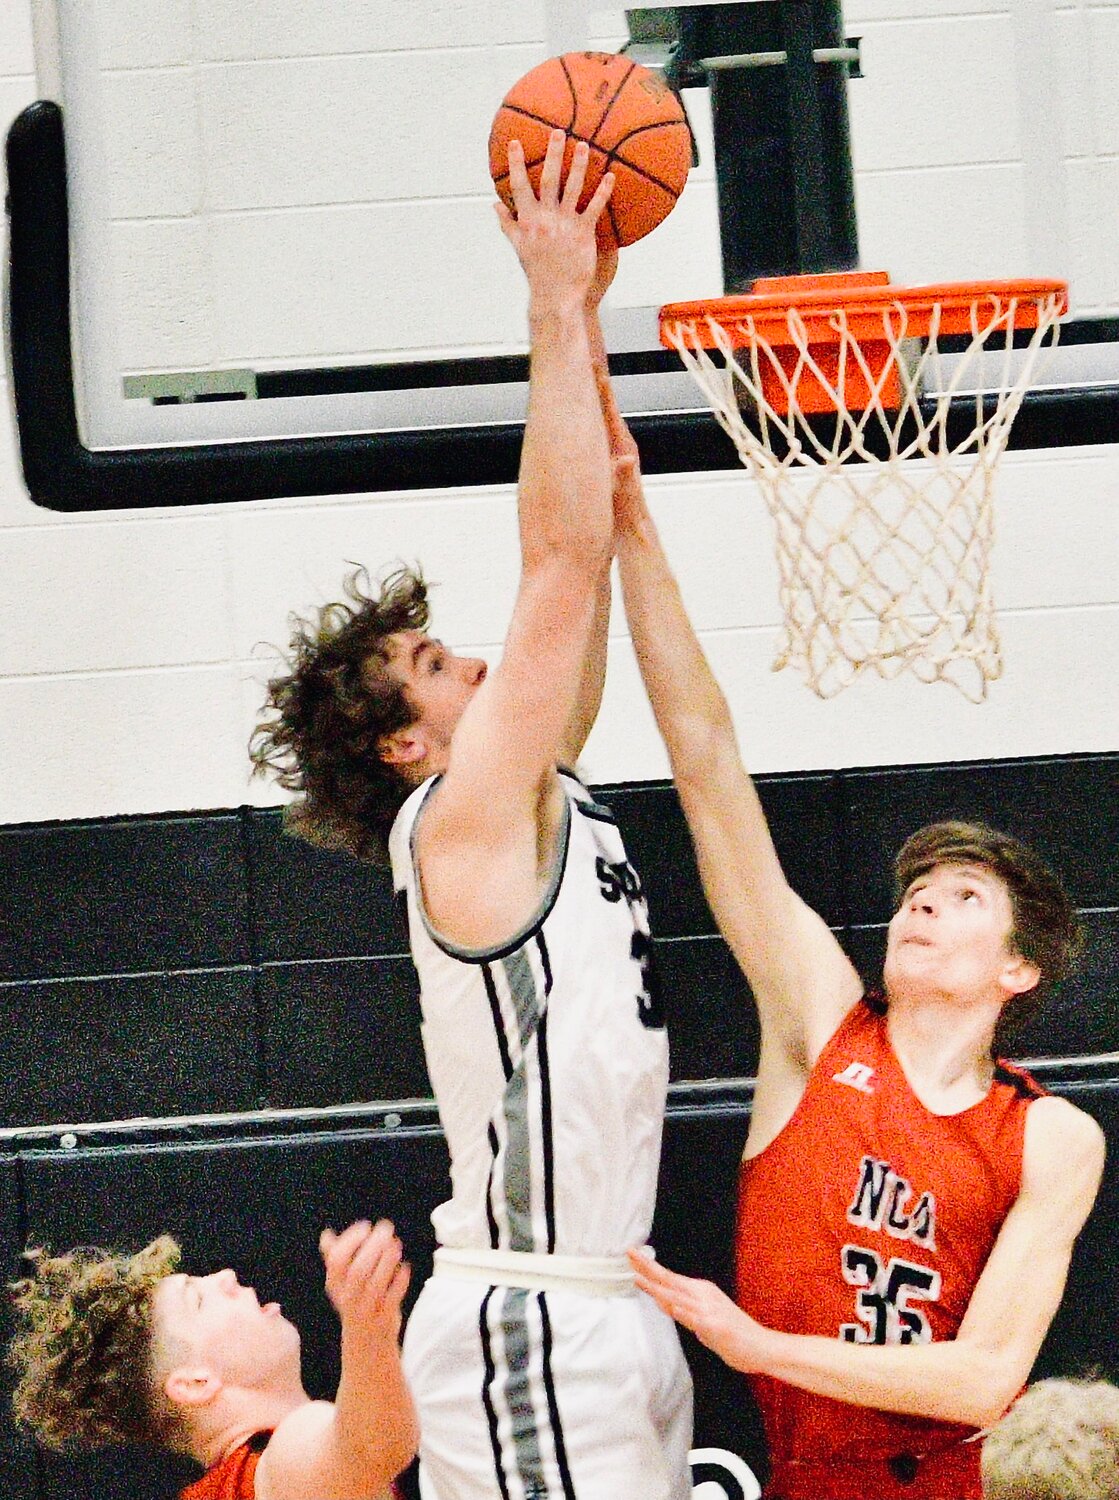 SPARTA'S JAKE LAFFERTY scores two of his 41 points.